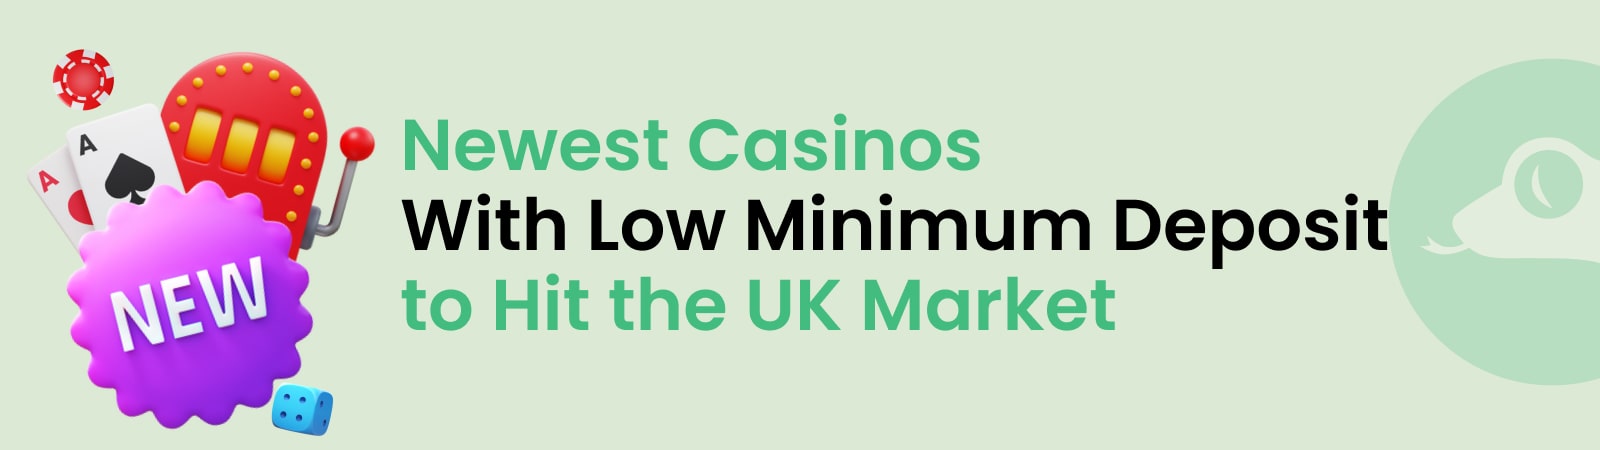 newest casinos with low minimum deposit to hit the uk market